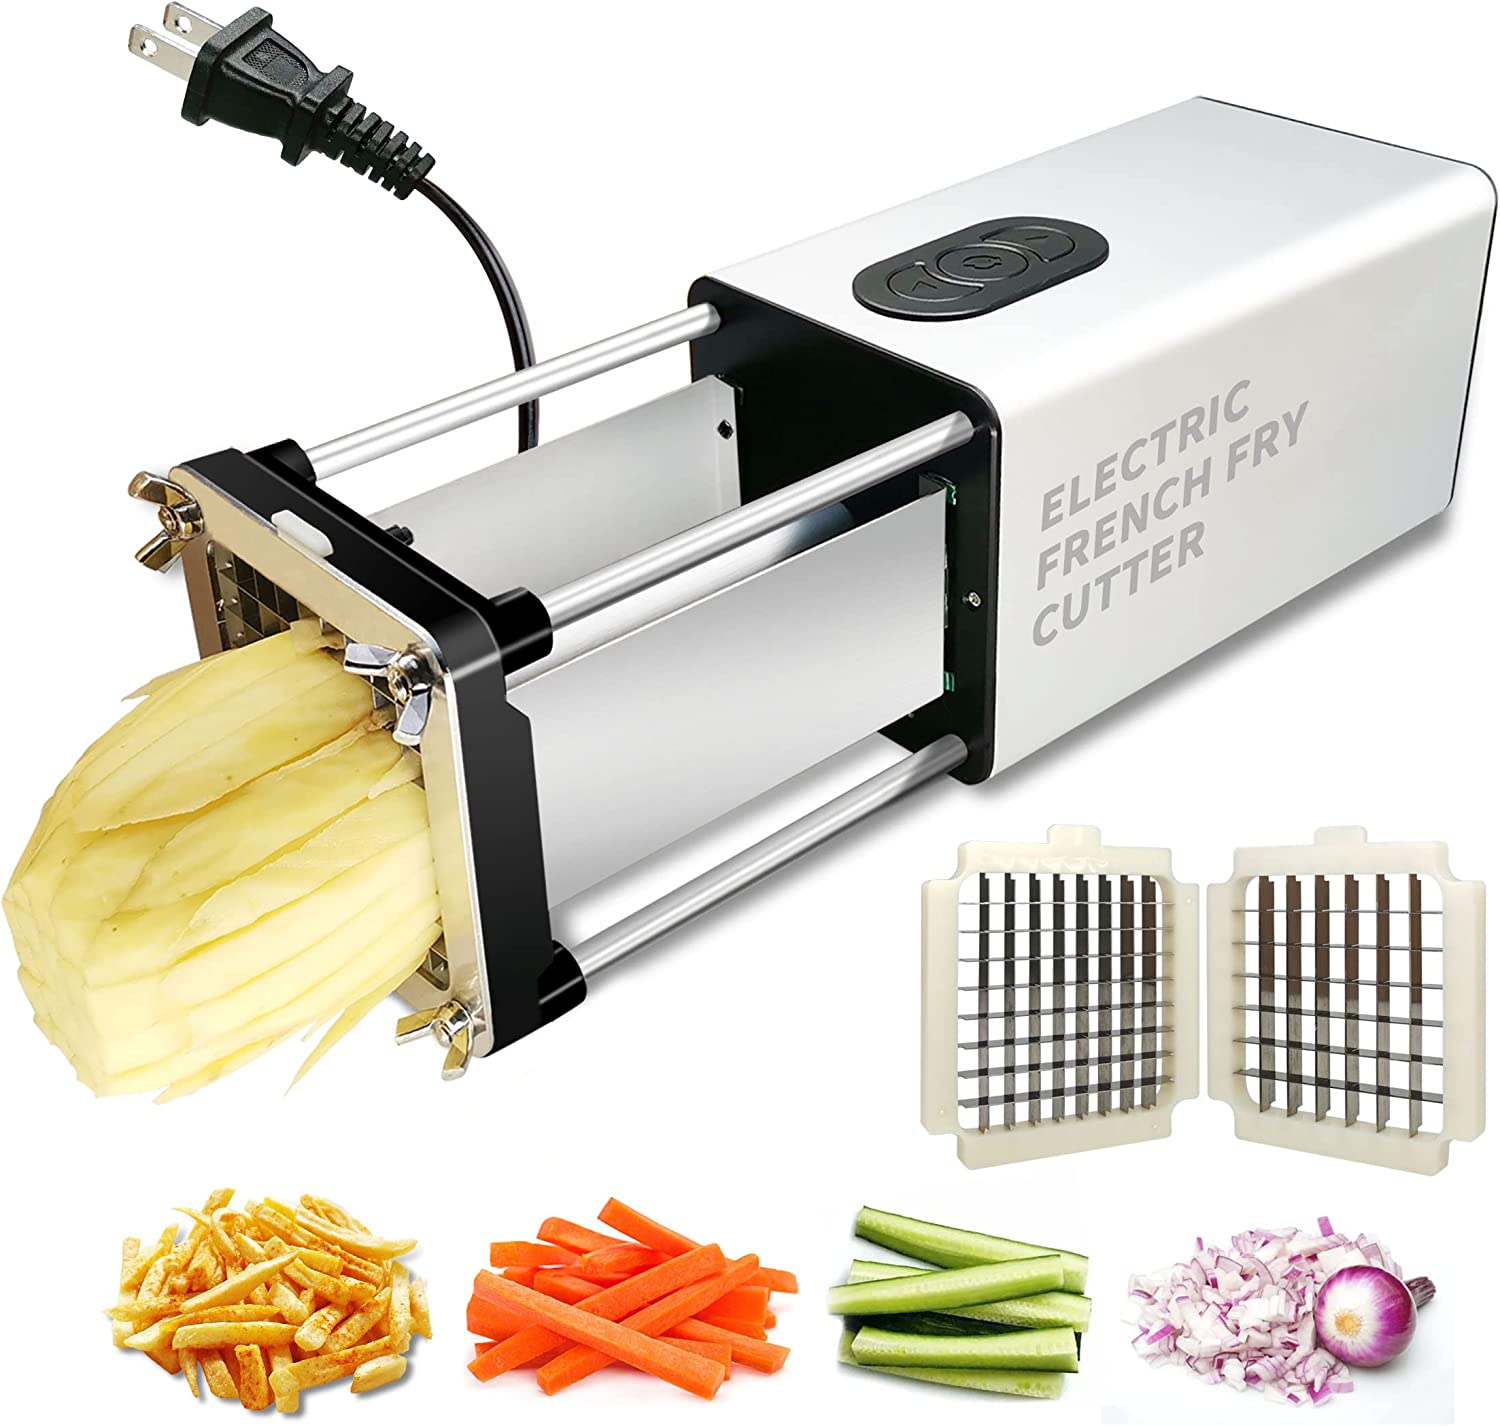 Weston French Fry Cutter & Vegetable Dicer, 36-3301-W 